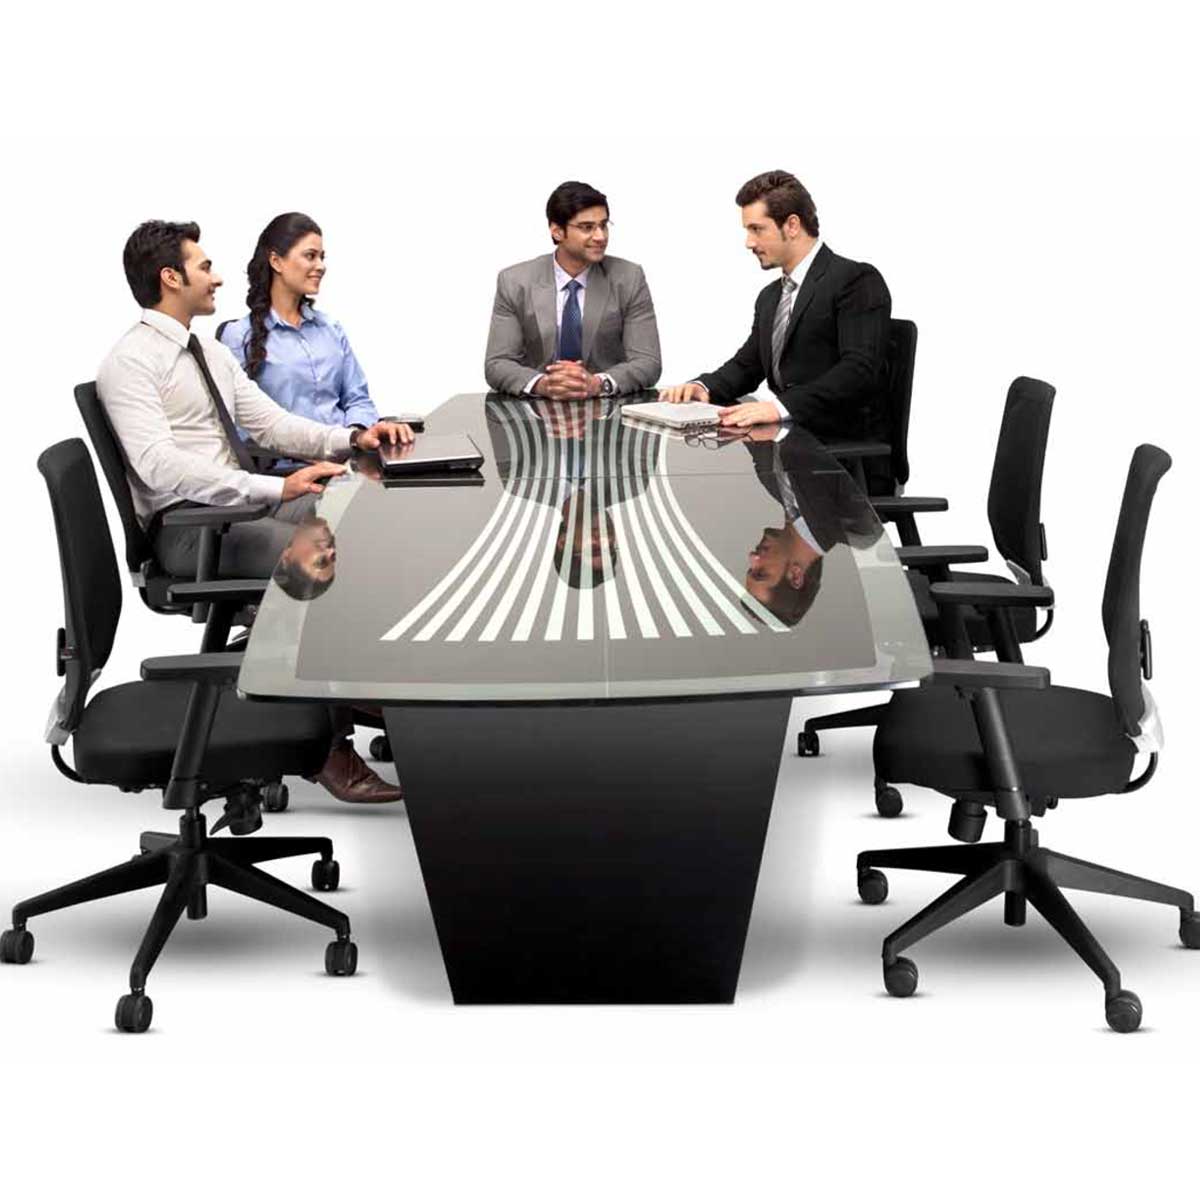 Metal Office Table Manufacturers, Suppliers, Exporters in Delhi 